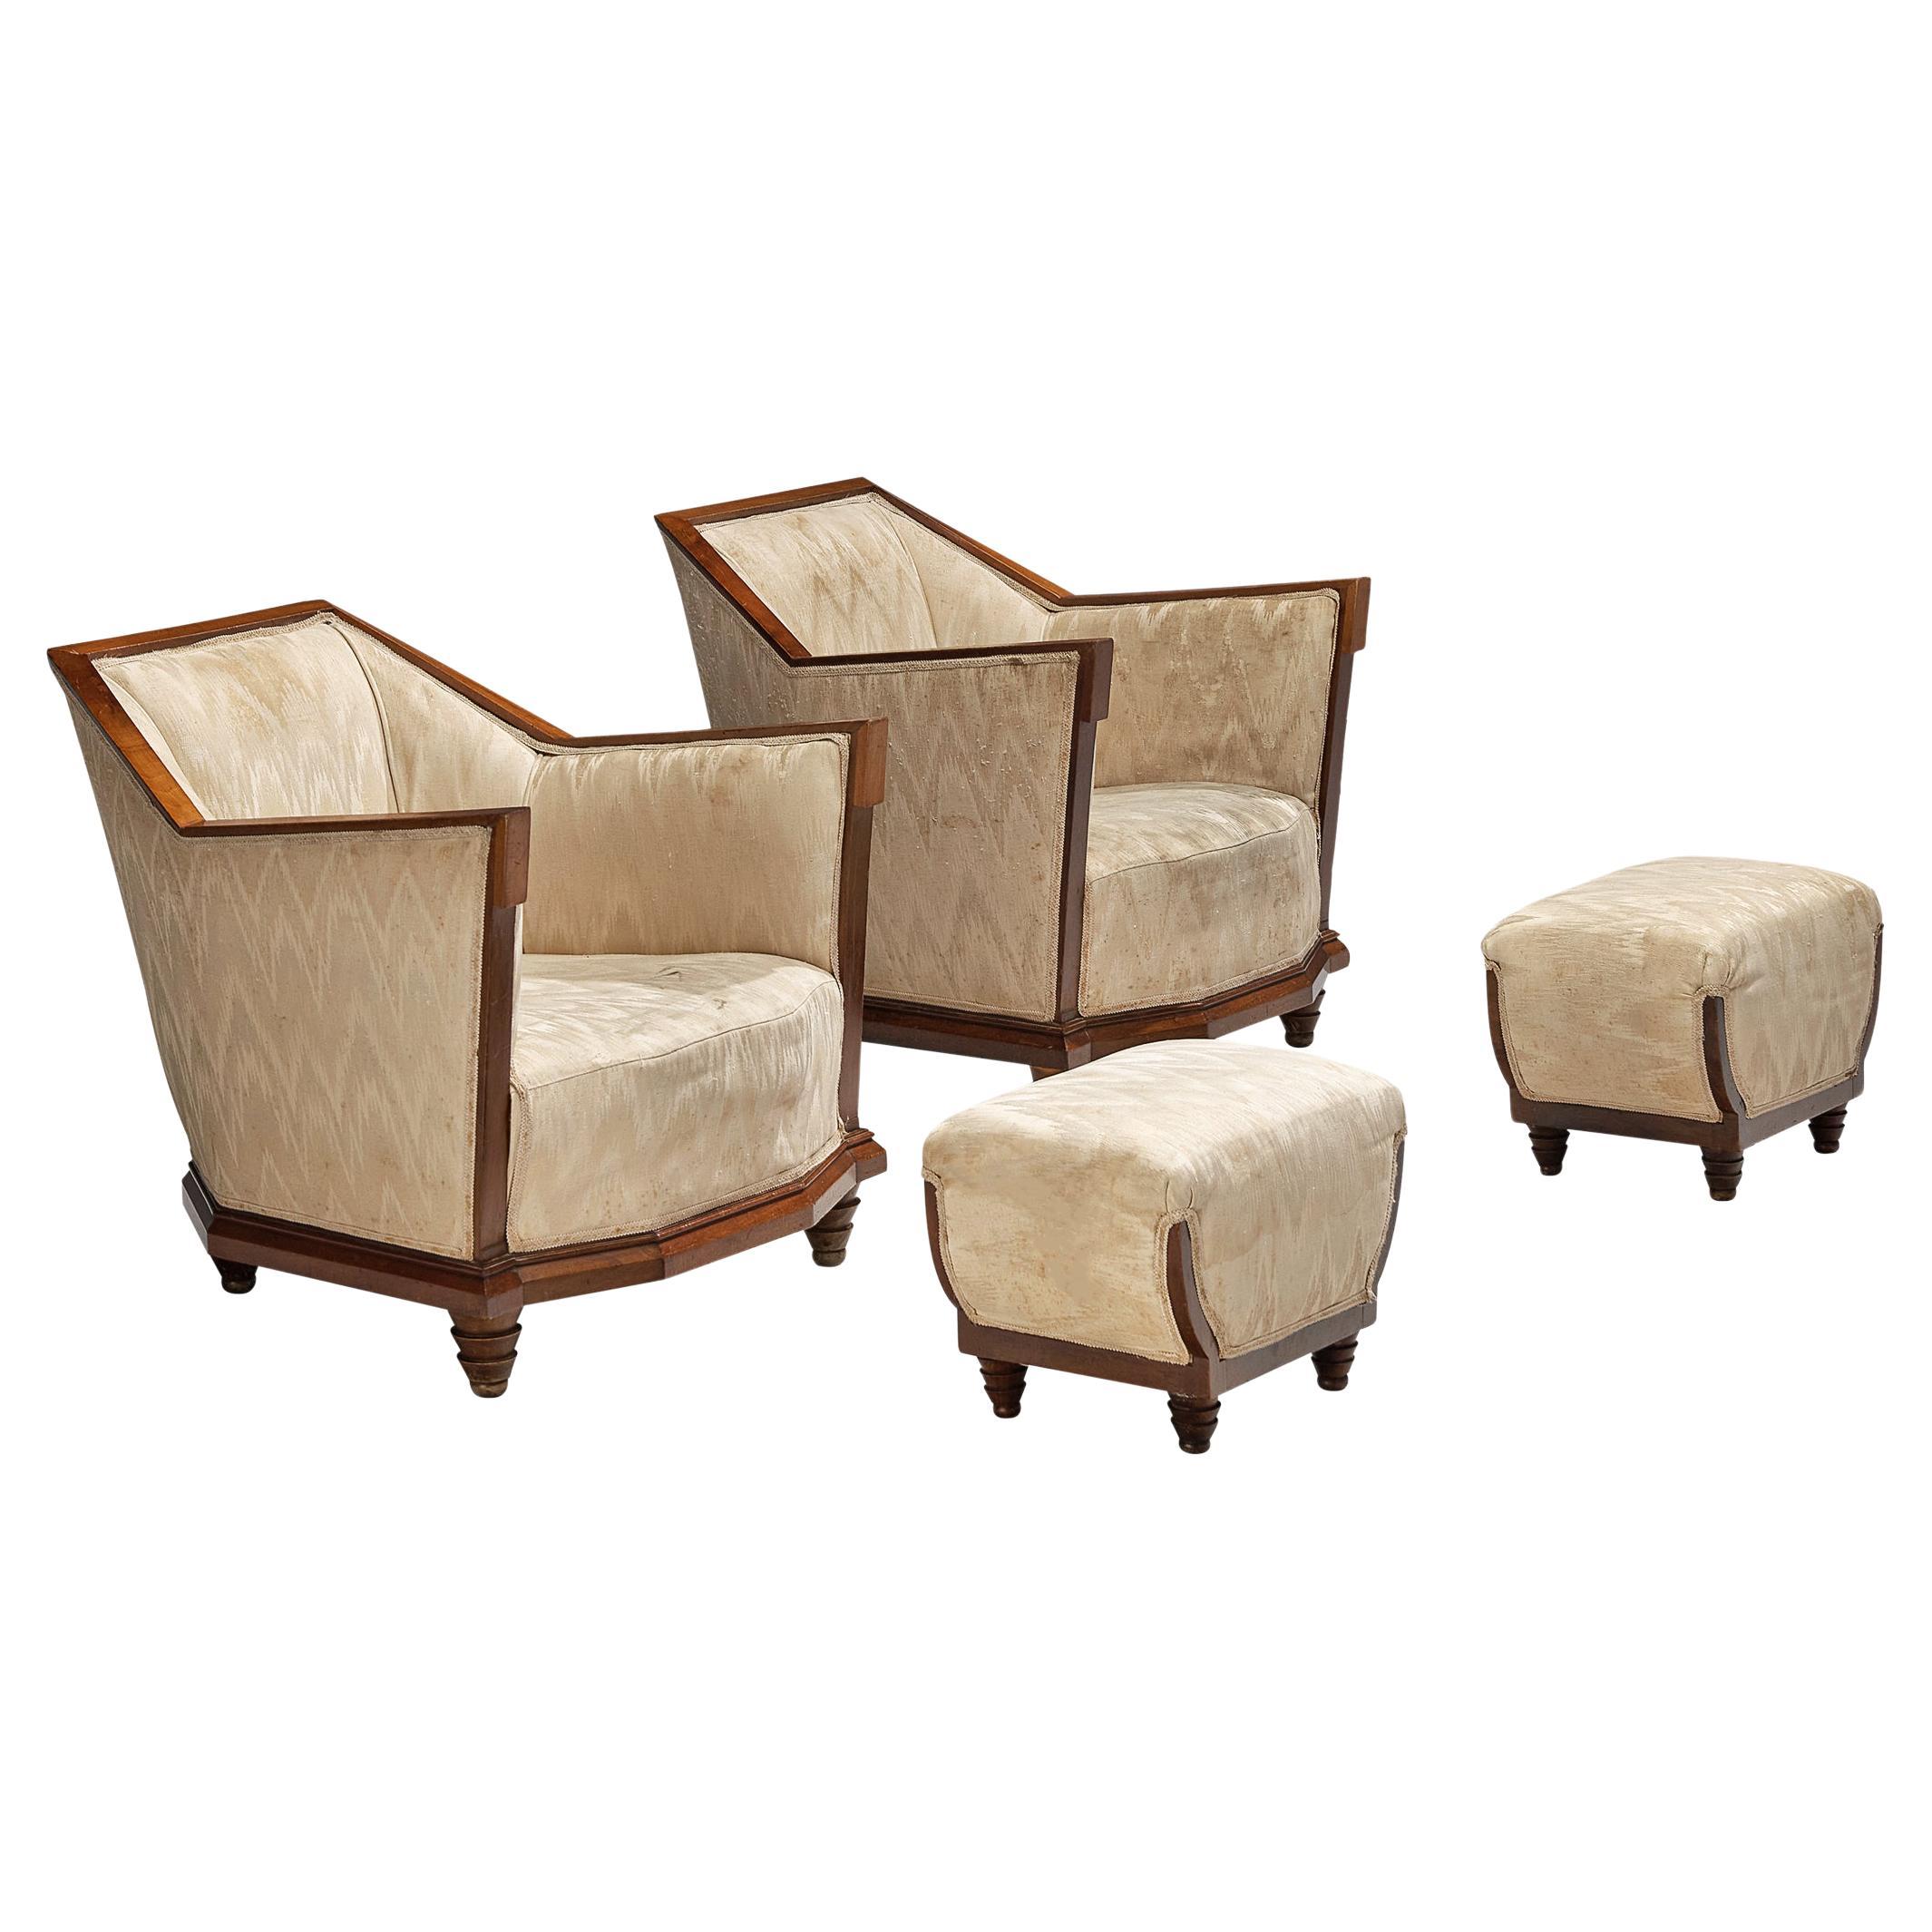 Italian Pair of Art Deco Lounge Chairs with Ottomans in Walnut and Silk